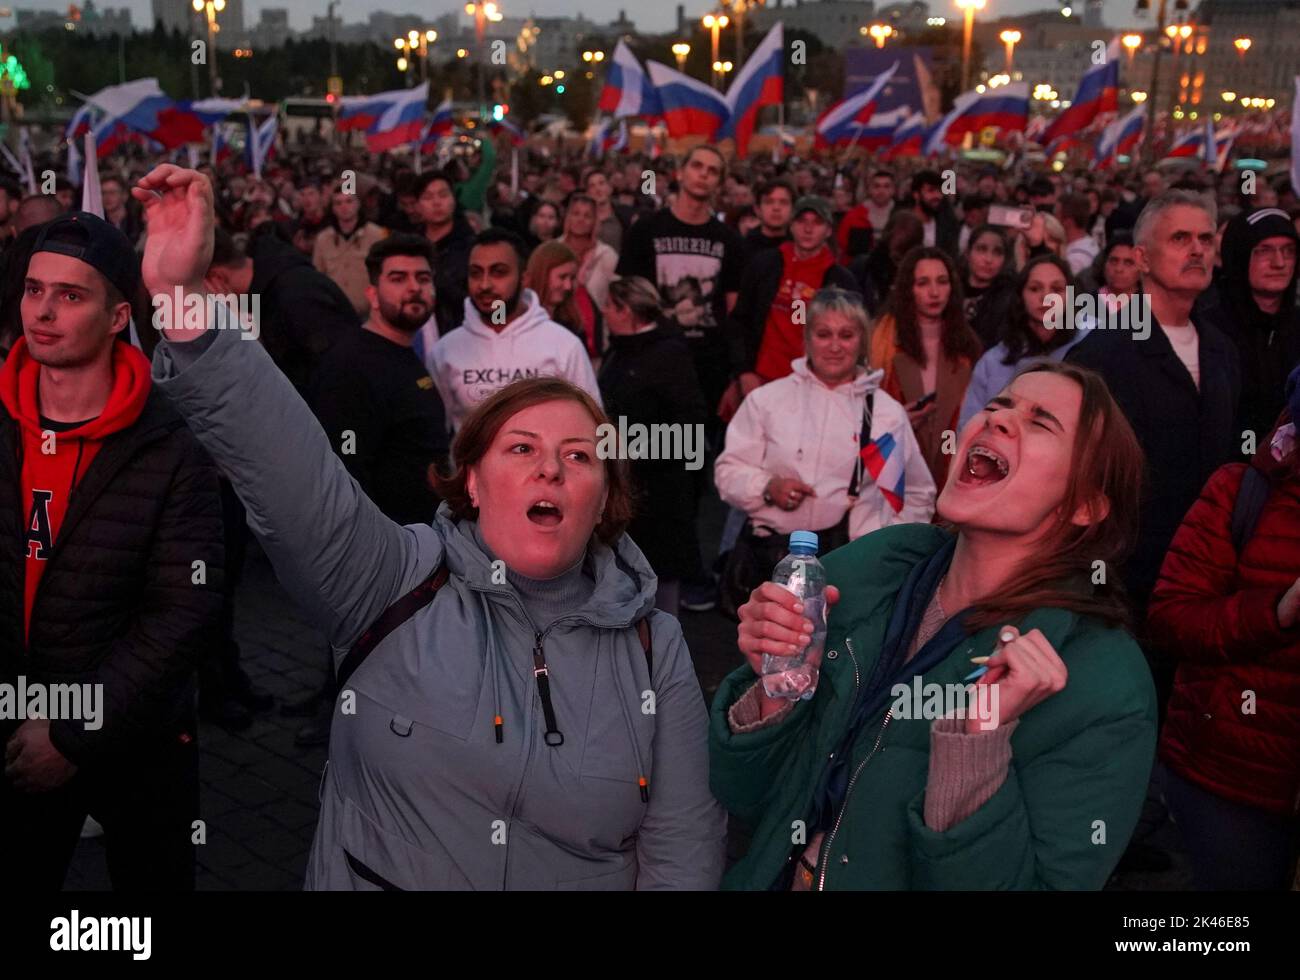 People attend a concert marking the declared annexation of the Russian-controlled territories of four Ukraine's Donetsk, Luhansk, Kherson and Zaporizhzhia regions, after holding what Russian authorities called referendums in the occupied areas of Ukraine that were condemned by Kyiv and governments worldwide, in central Moscow, Russia, September 30, 2022. REUTERS/REUTERS PHOTOGRAPHER Stock Photo